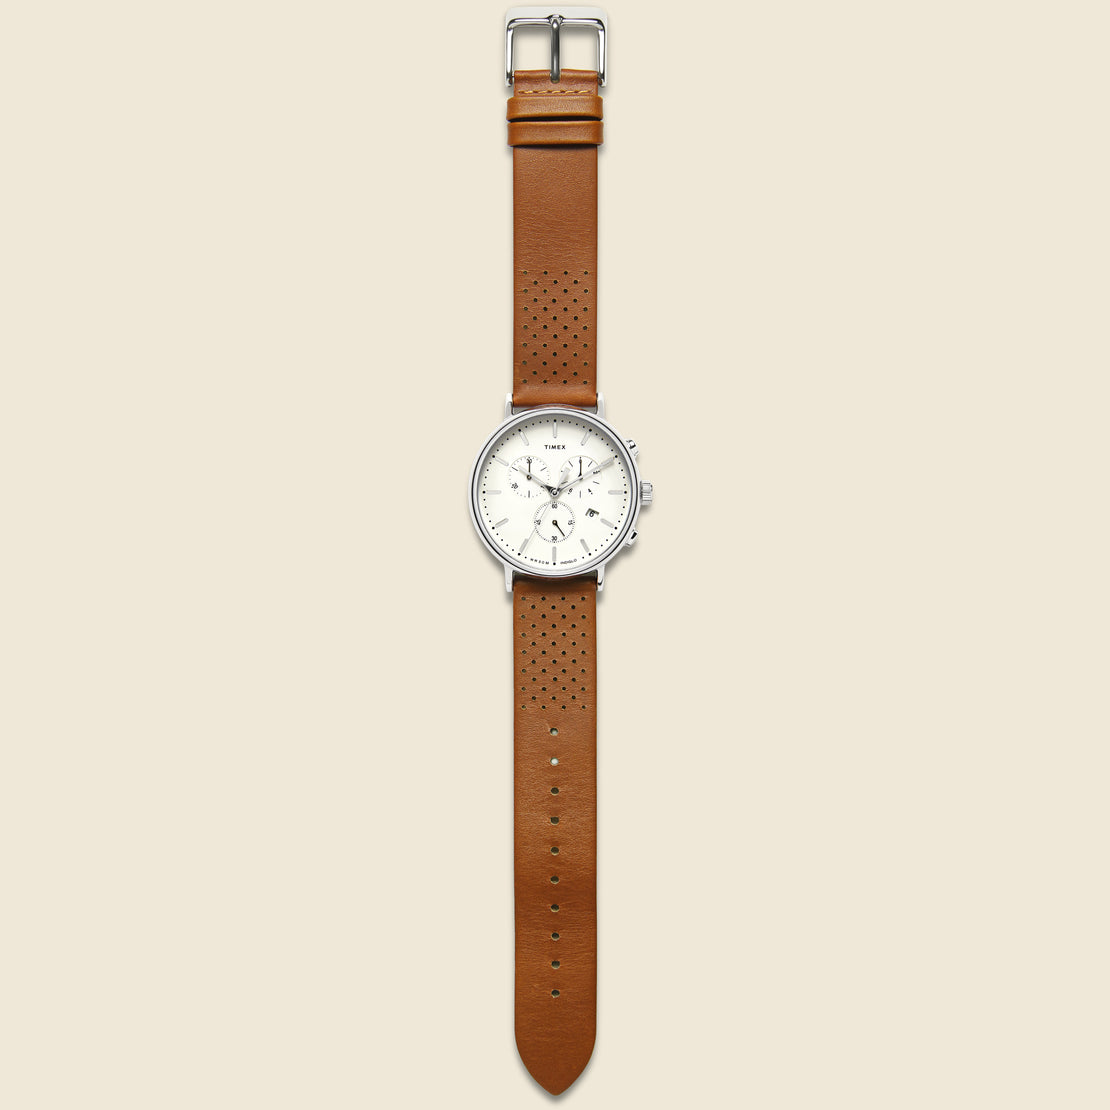 Fairfield Chronograph Leather Strap Watch 41mm - Silver Tone/Tan/White